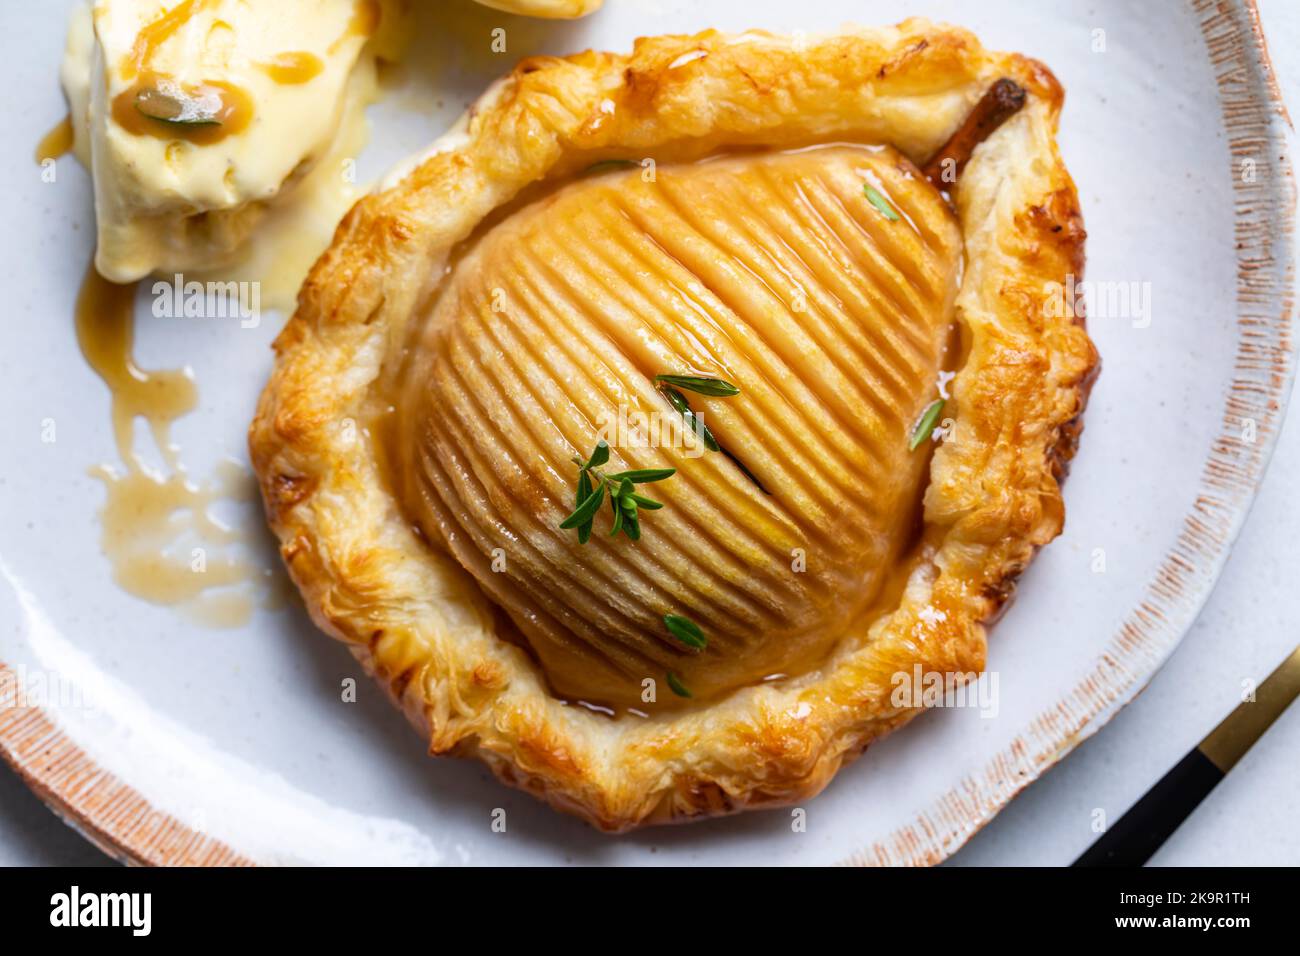 Hasselback pear in puff pastry with vanilla ice cream Stock Photo